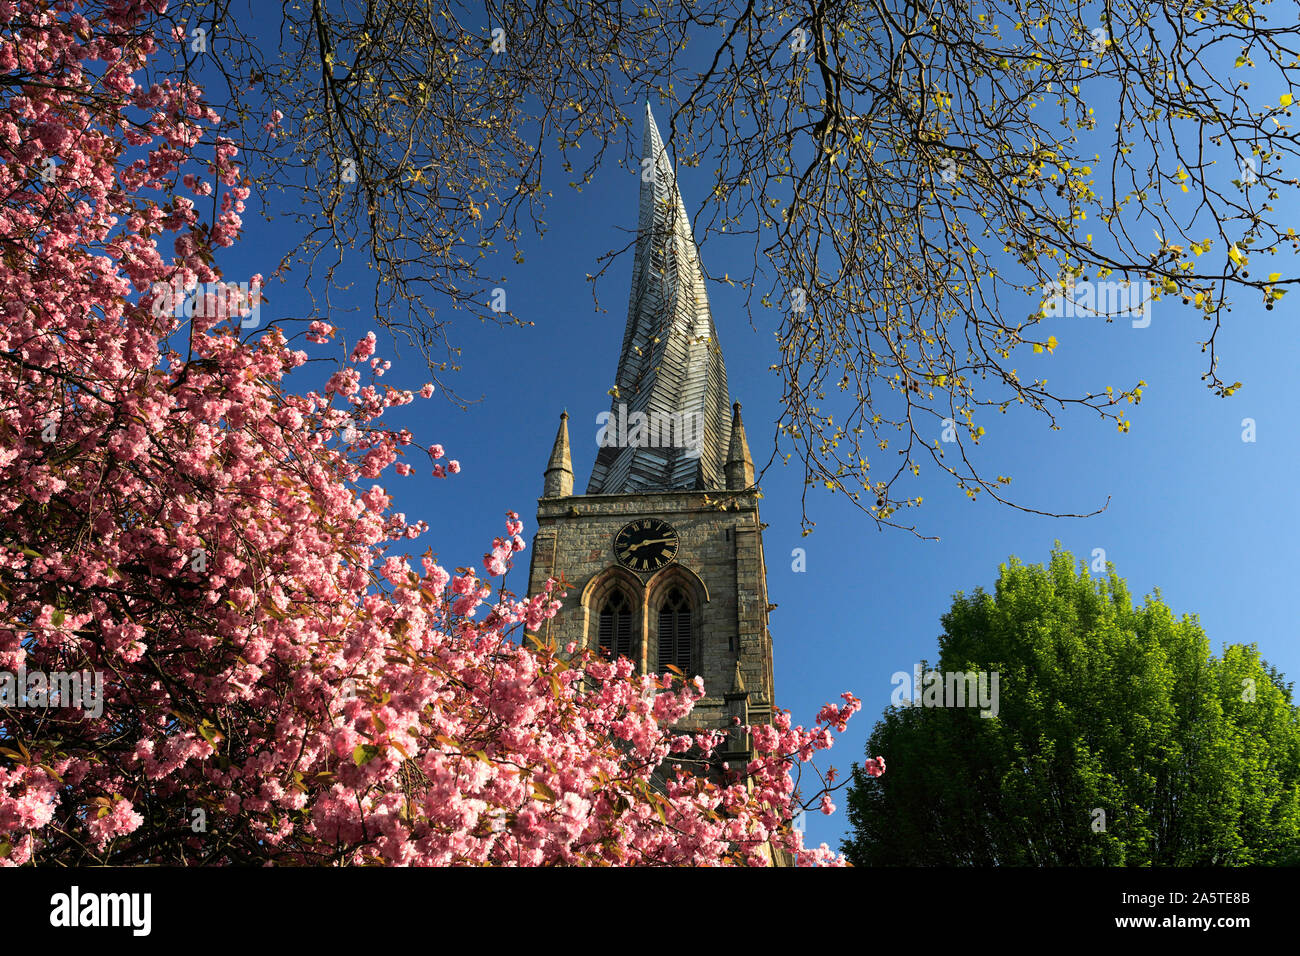 The Crooked Spire of St Mary and All saints Church, Chesterfield market town, Derbyshire, England, UK Stock Photo